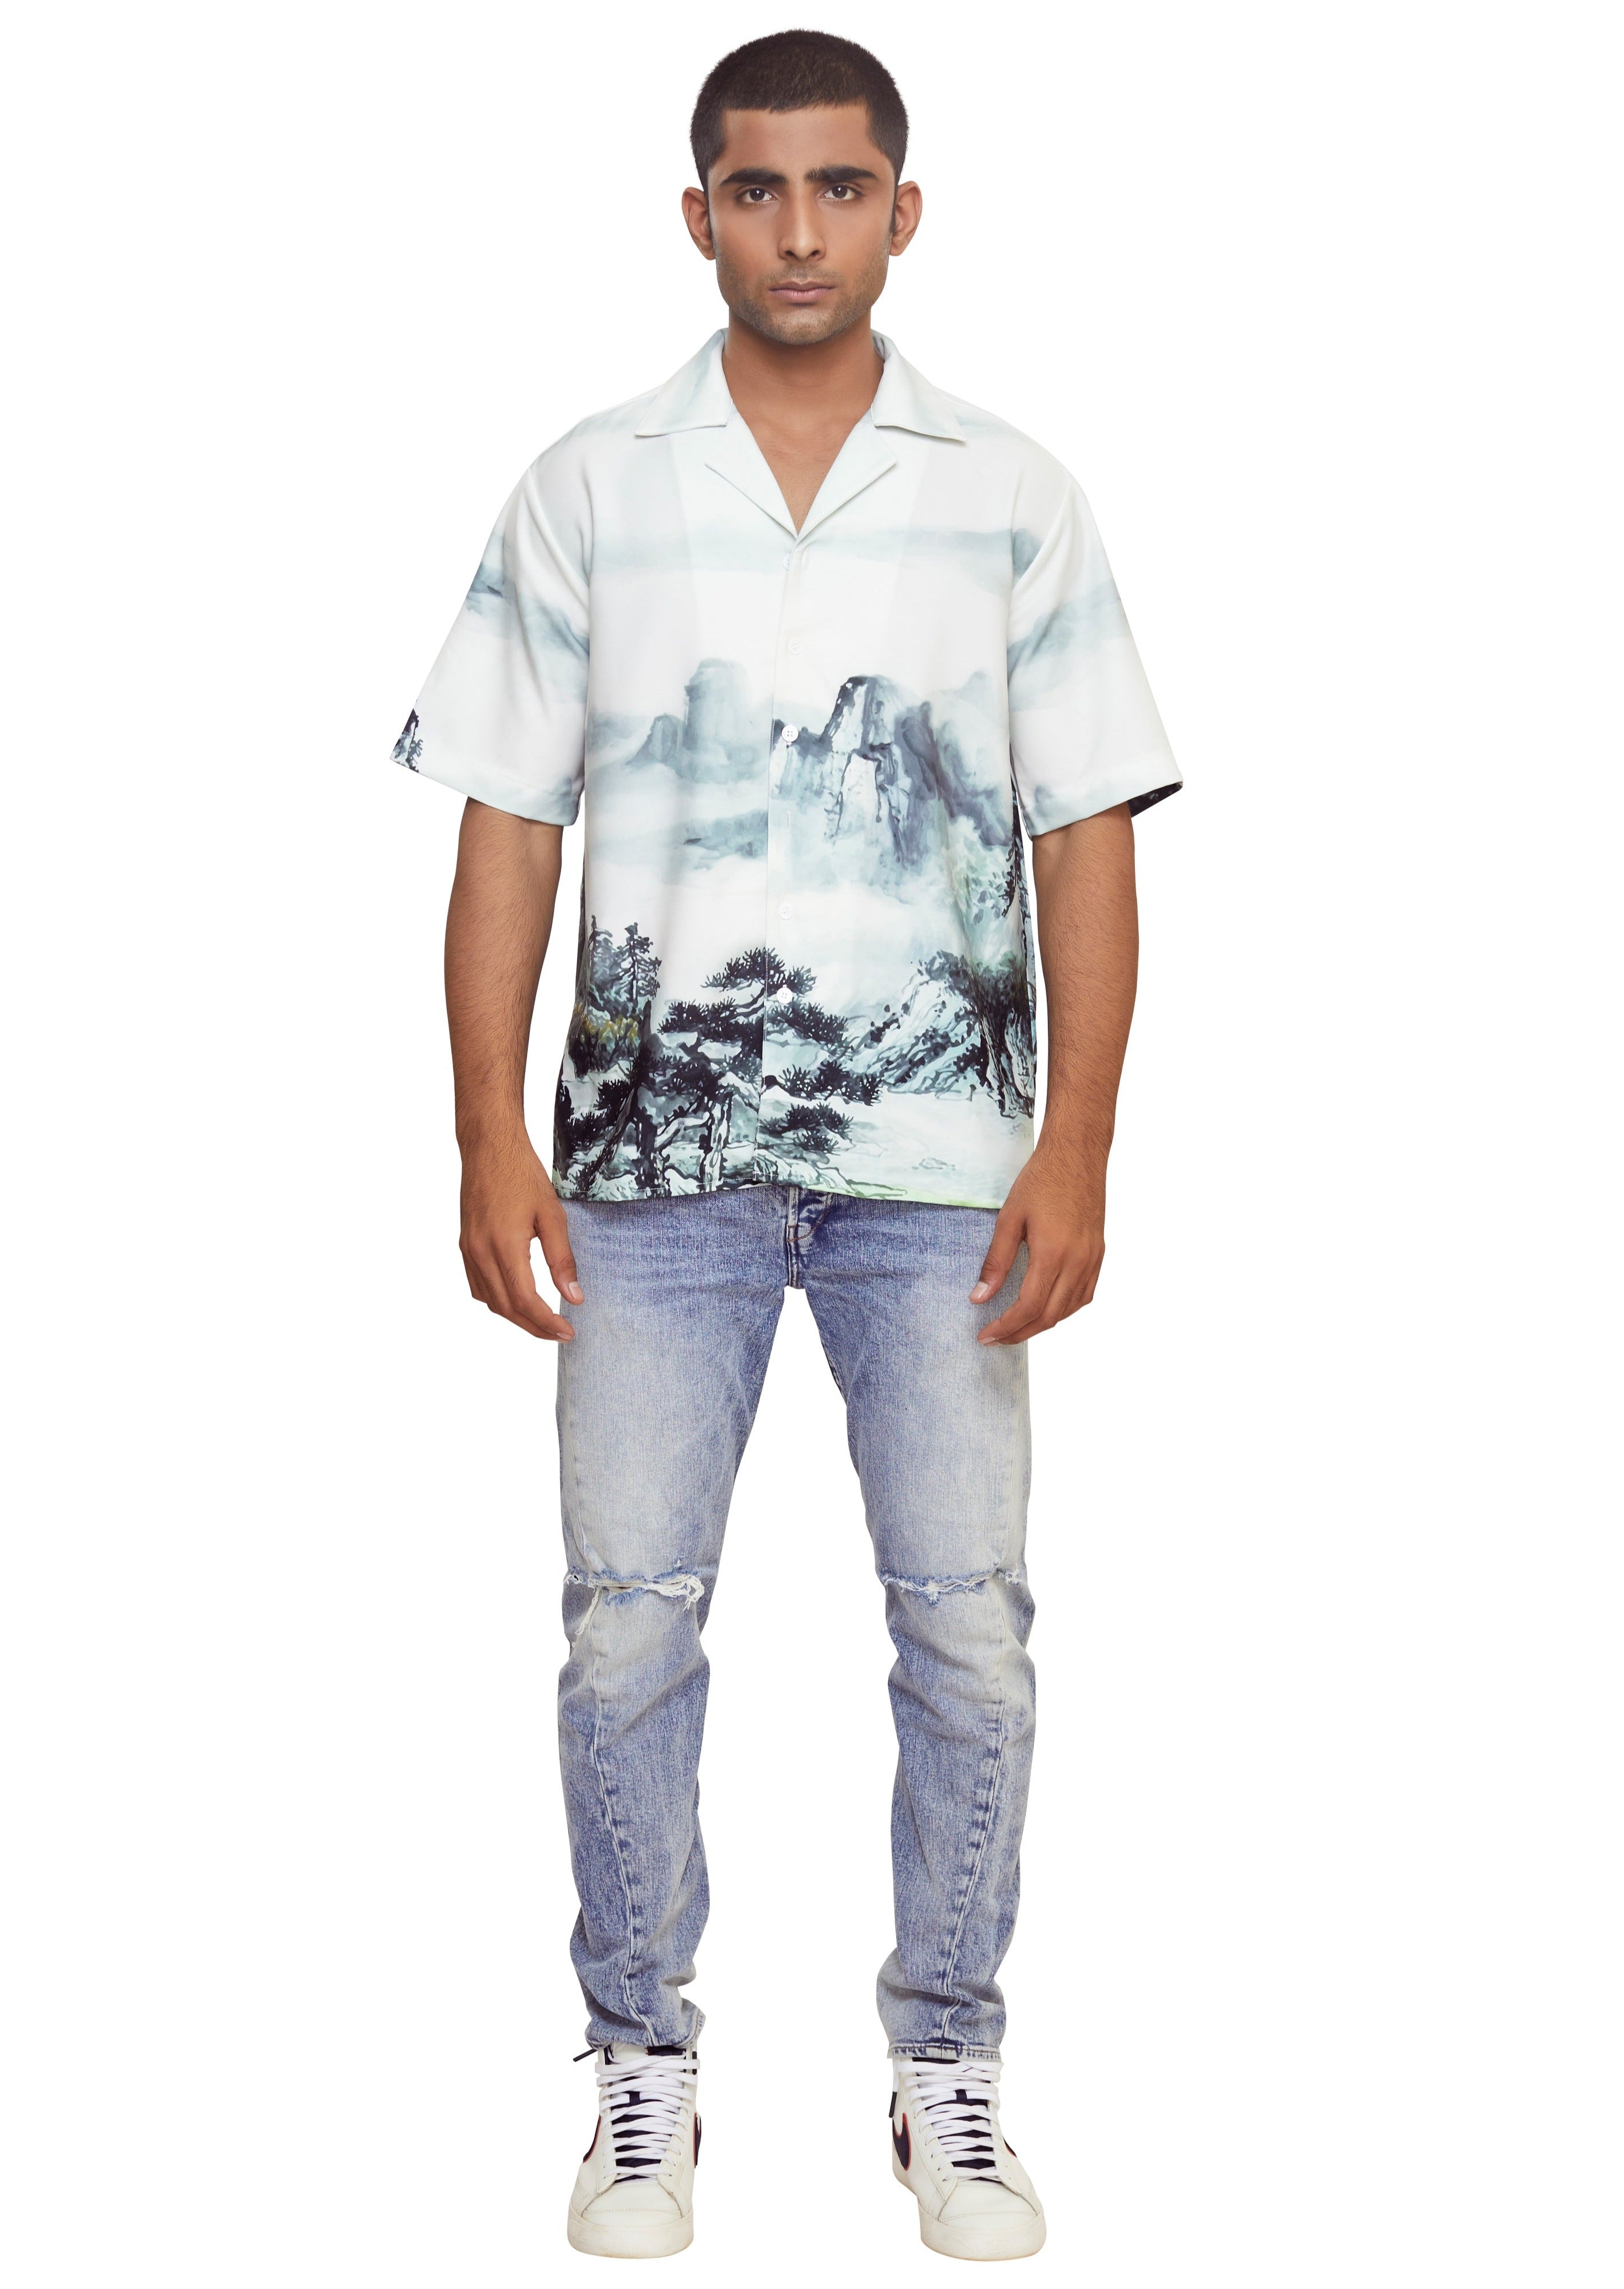 Blue and White Landscape Water Paint Short Sleeve button up shirt from the brand Yitai